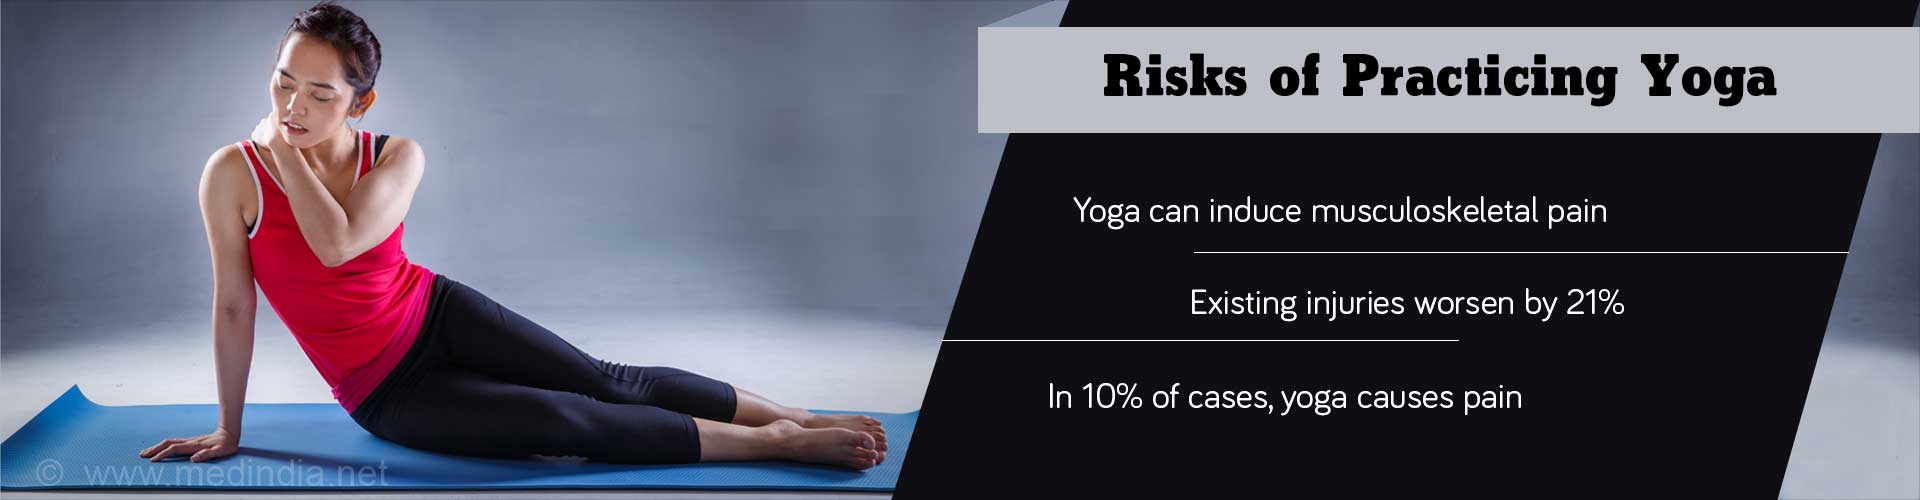 Risks of Practicing Yoga
- Yoga can induce musculoskeletal pain
- Existing injuries worsen by 21%
- In 10% of cases, yoga causes pain